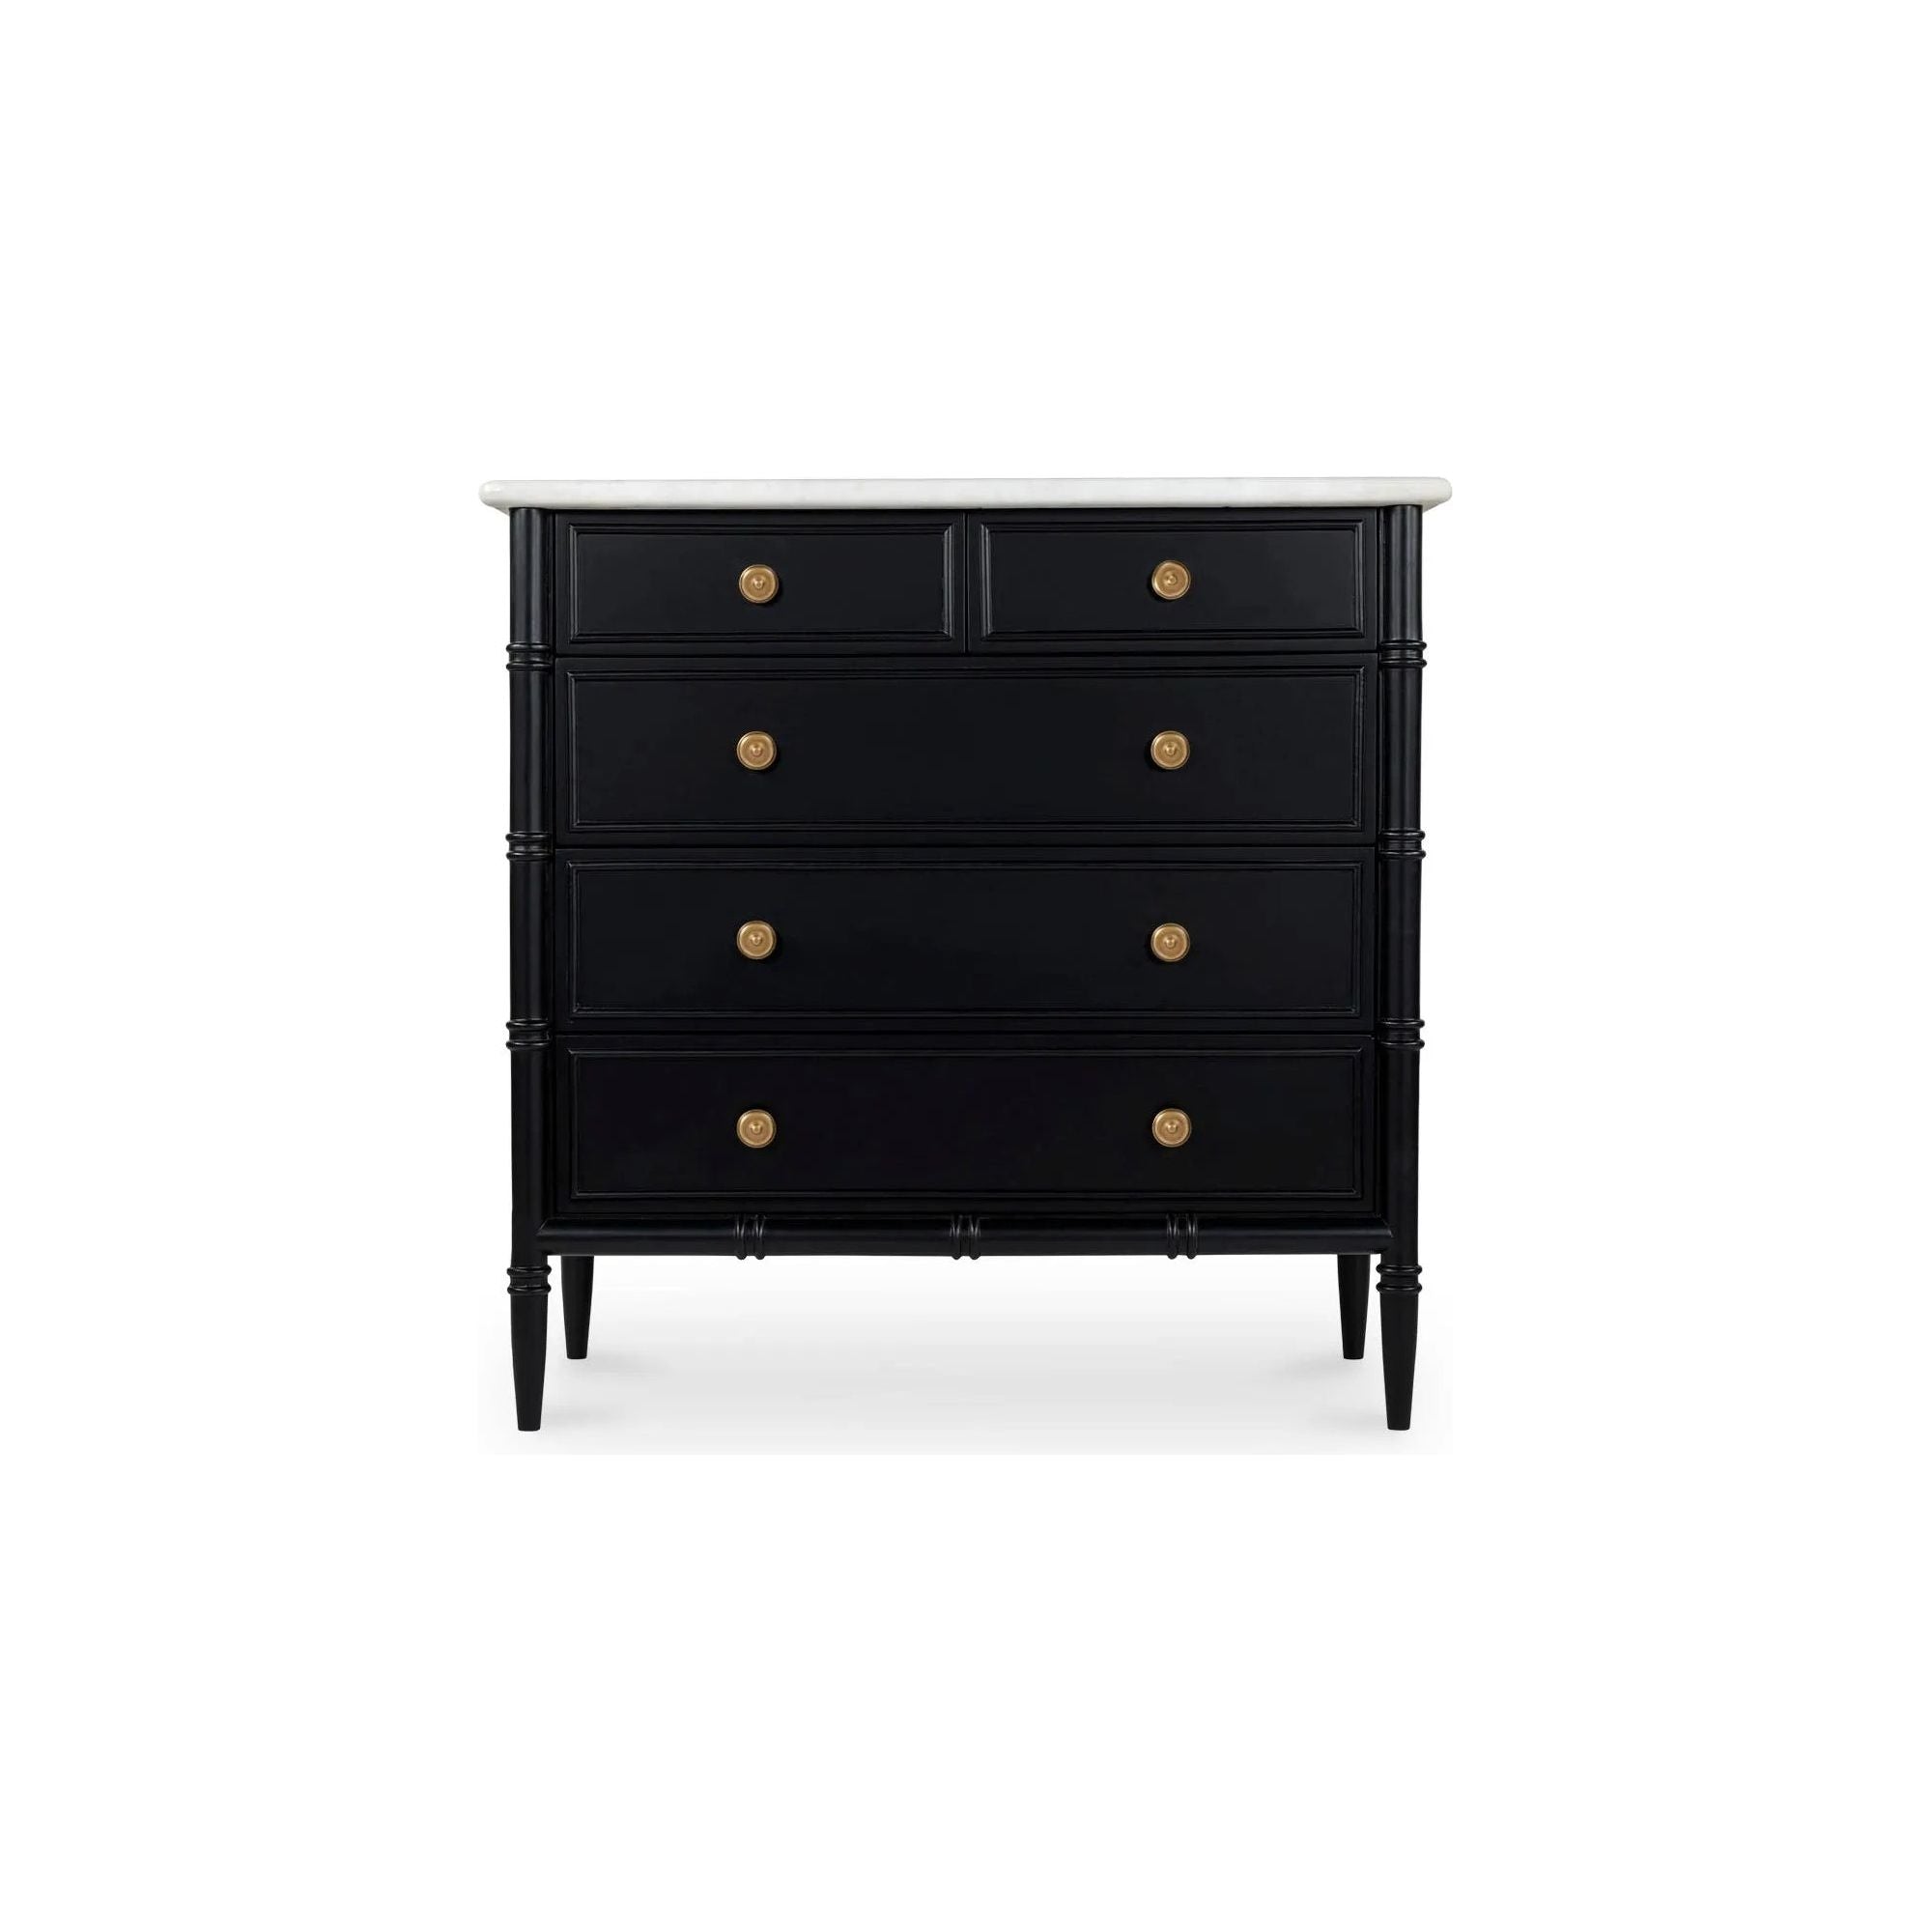 Inspired by the everyday grace of Provence style, the Eleanor 5-drawer chest showcases a classically graceful profile with distinctive turned details. Amethyst Home provides interior design, new home construction design consulting, vintage area rugs, and lighting in the Des Moines metro area.